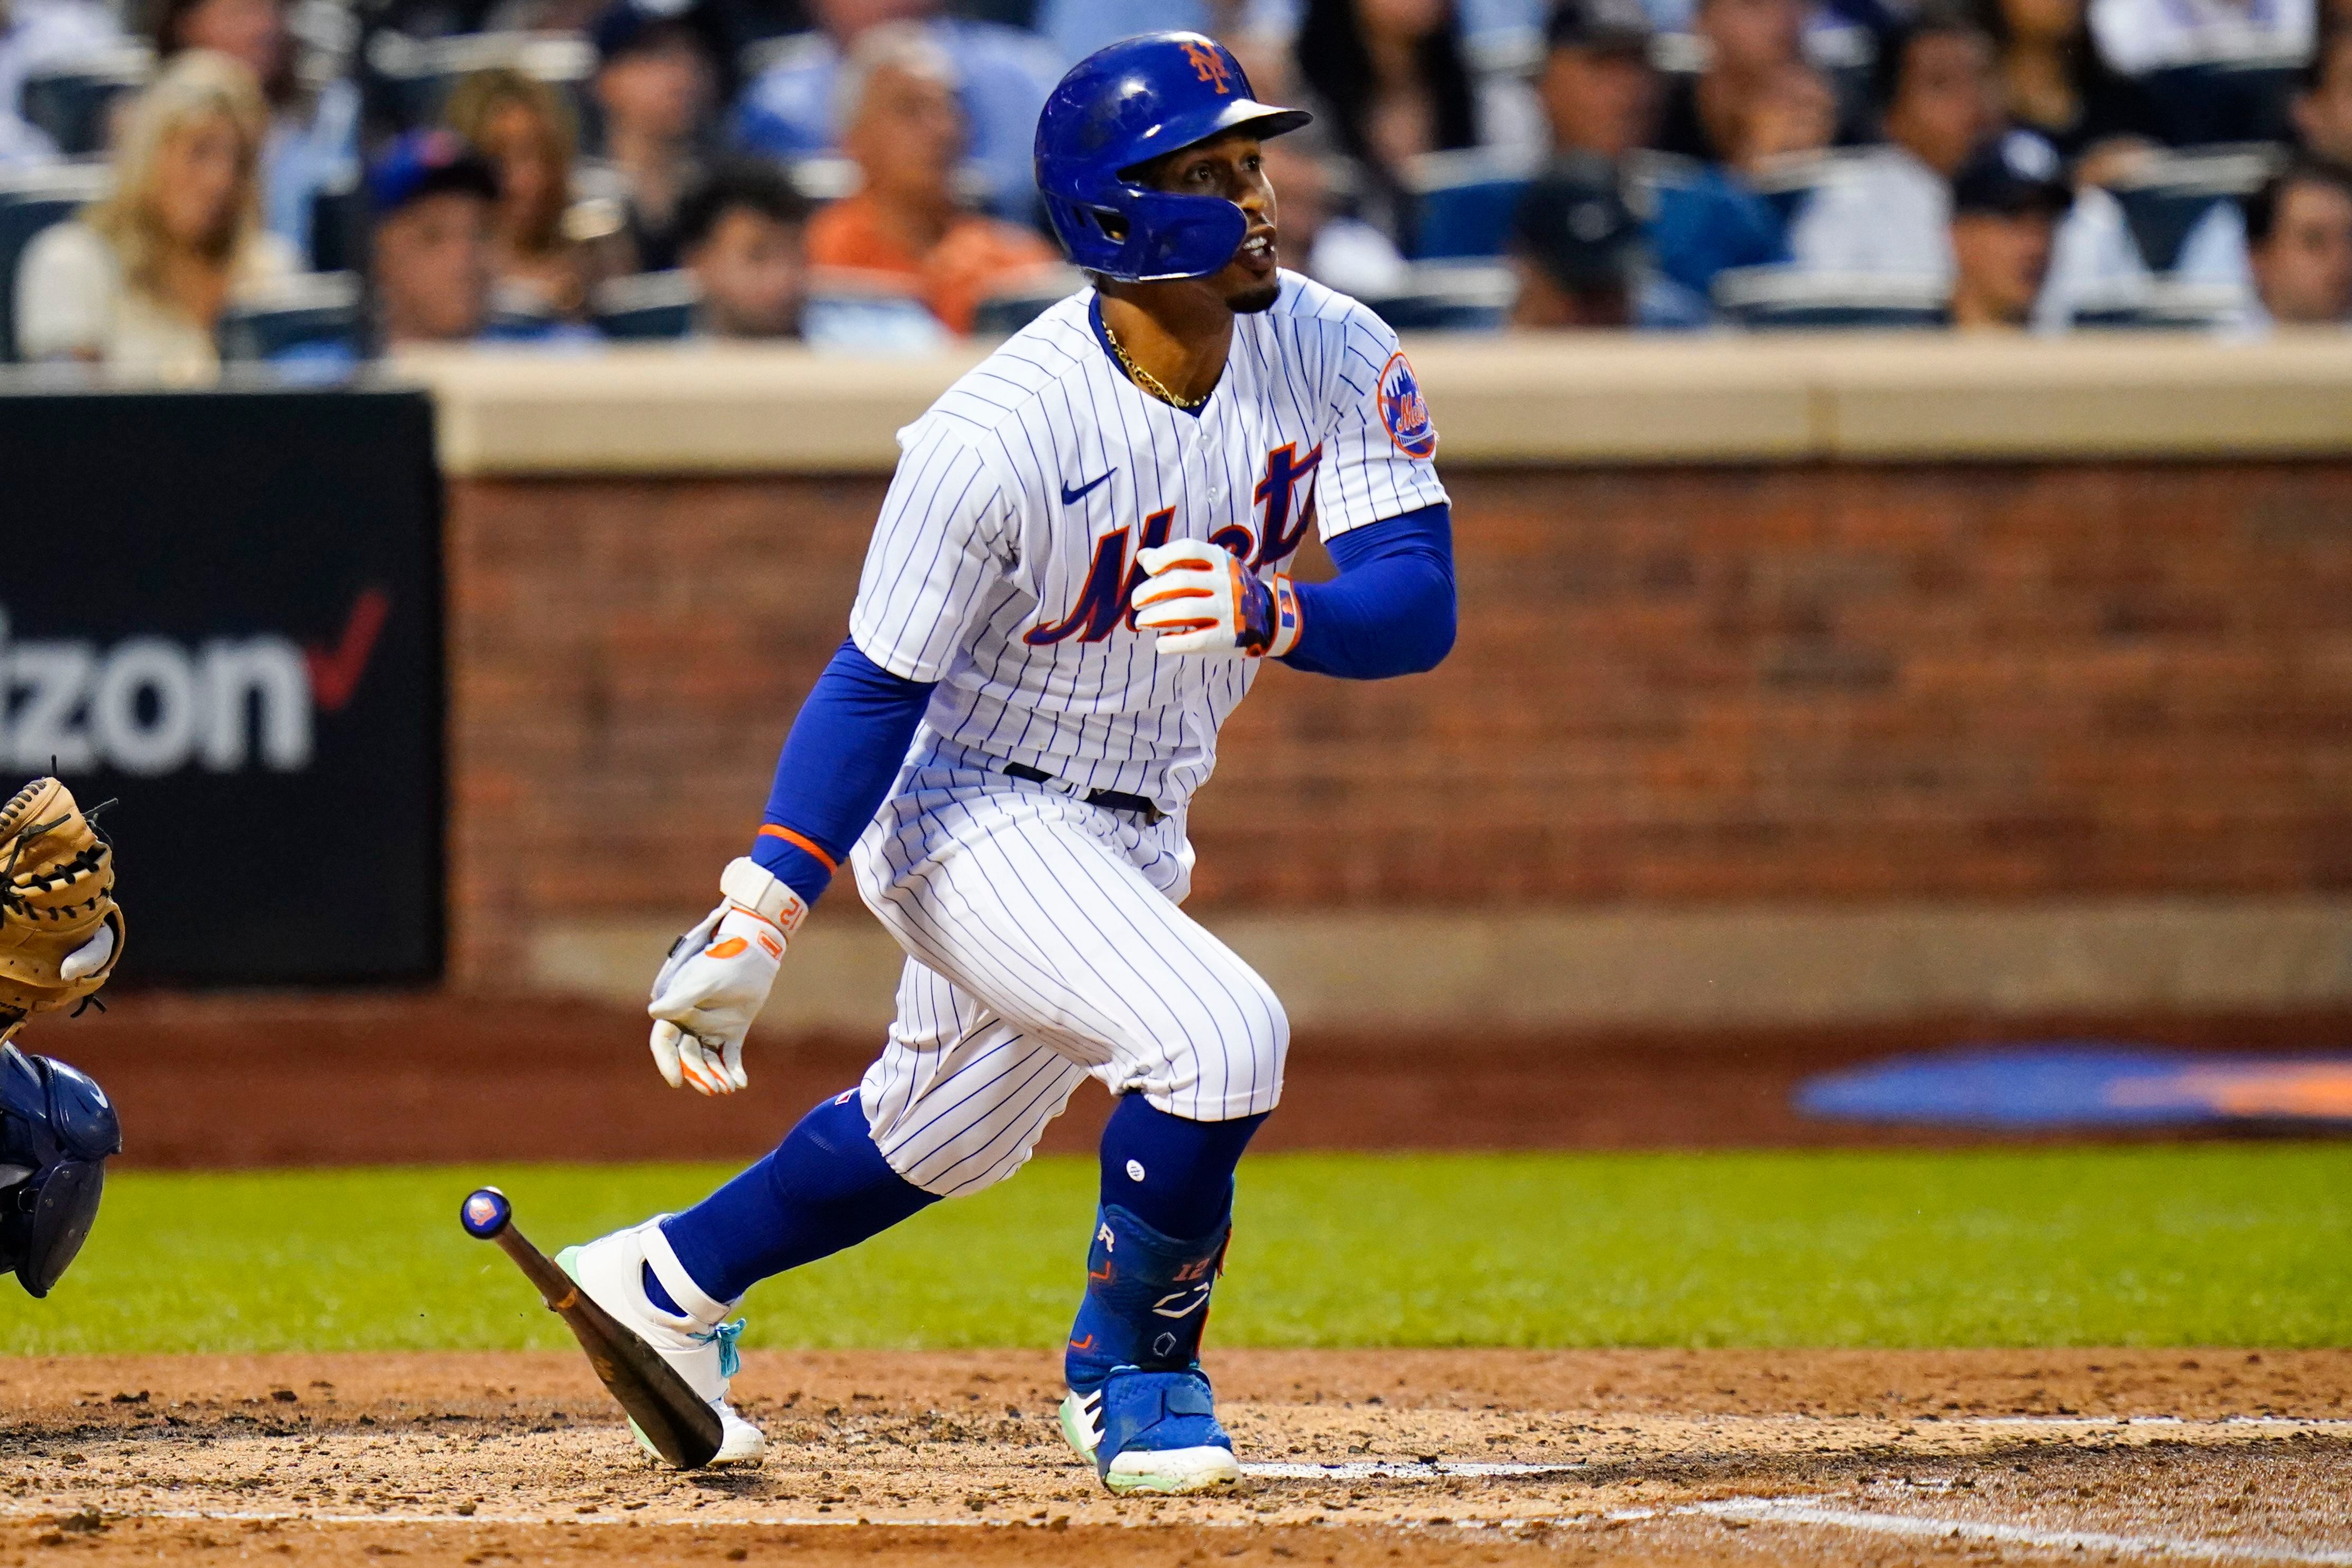 Marte's walk-off single gives Mets 2-game sweep over Yankees